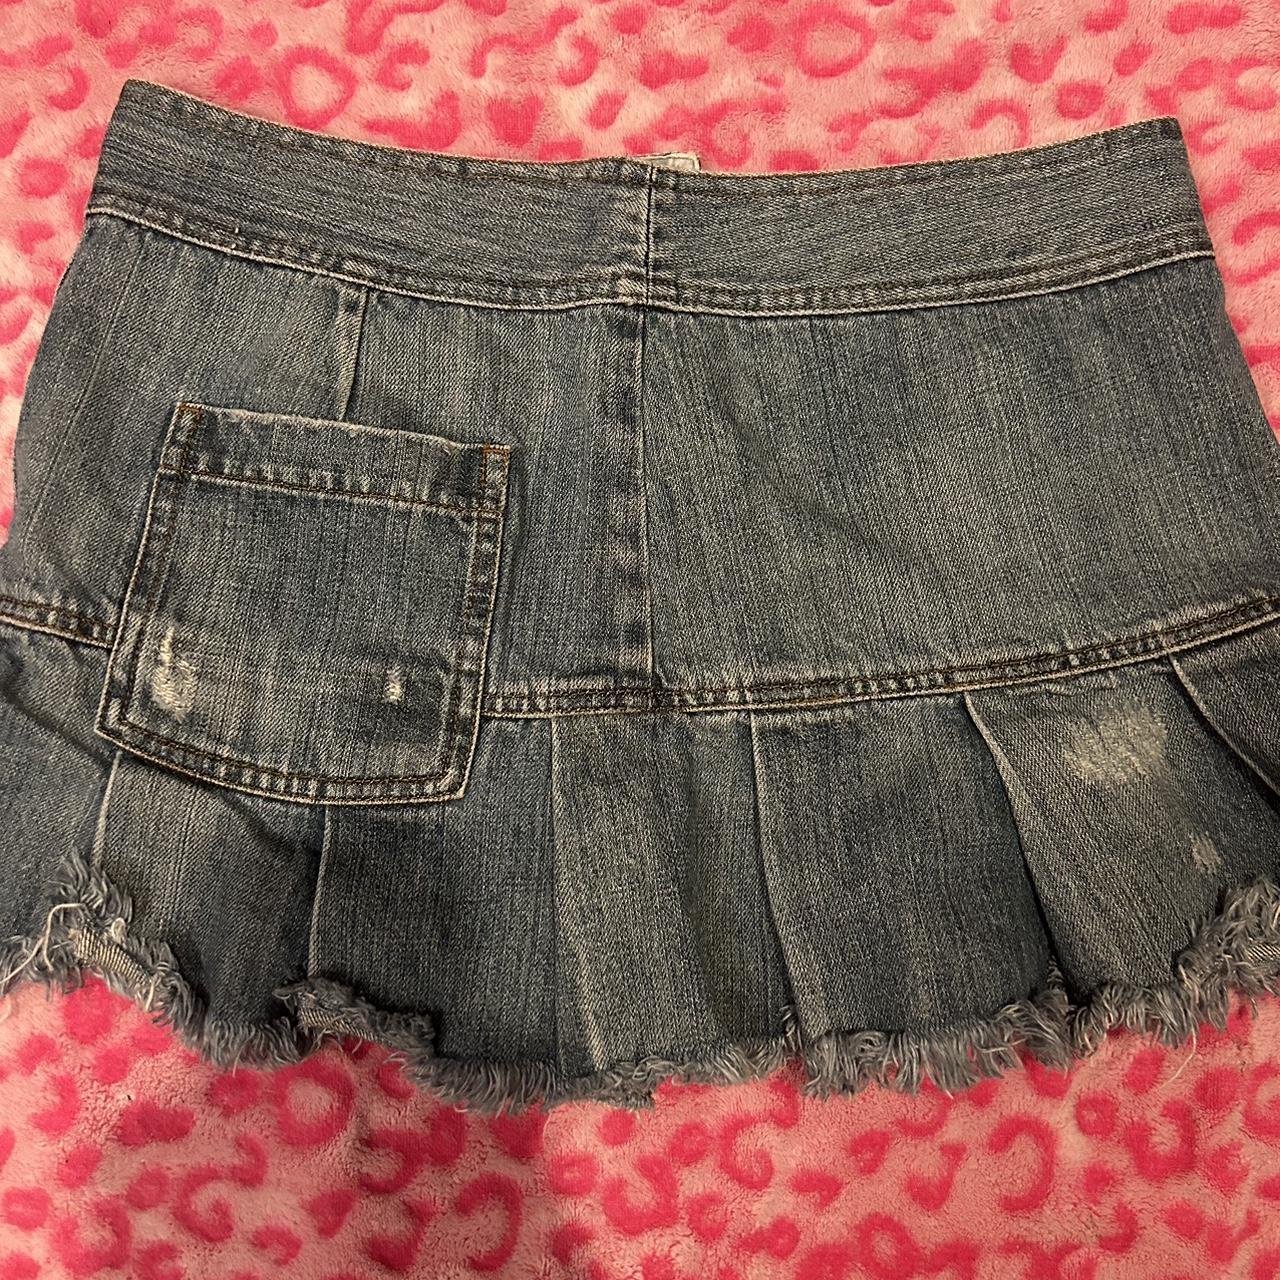 Denim cute 2000s skirt hardly worn don’t know what... - Depop